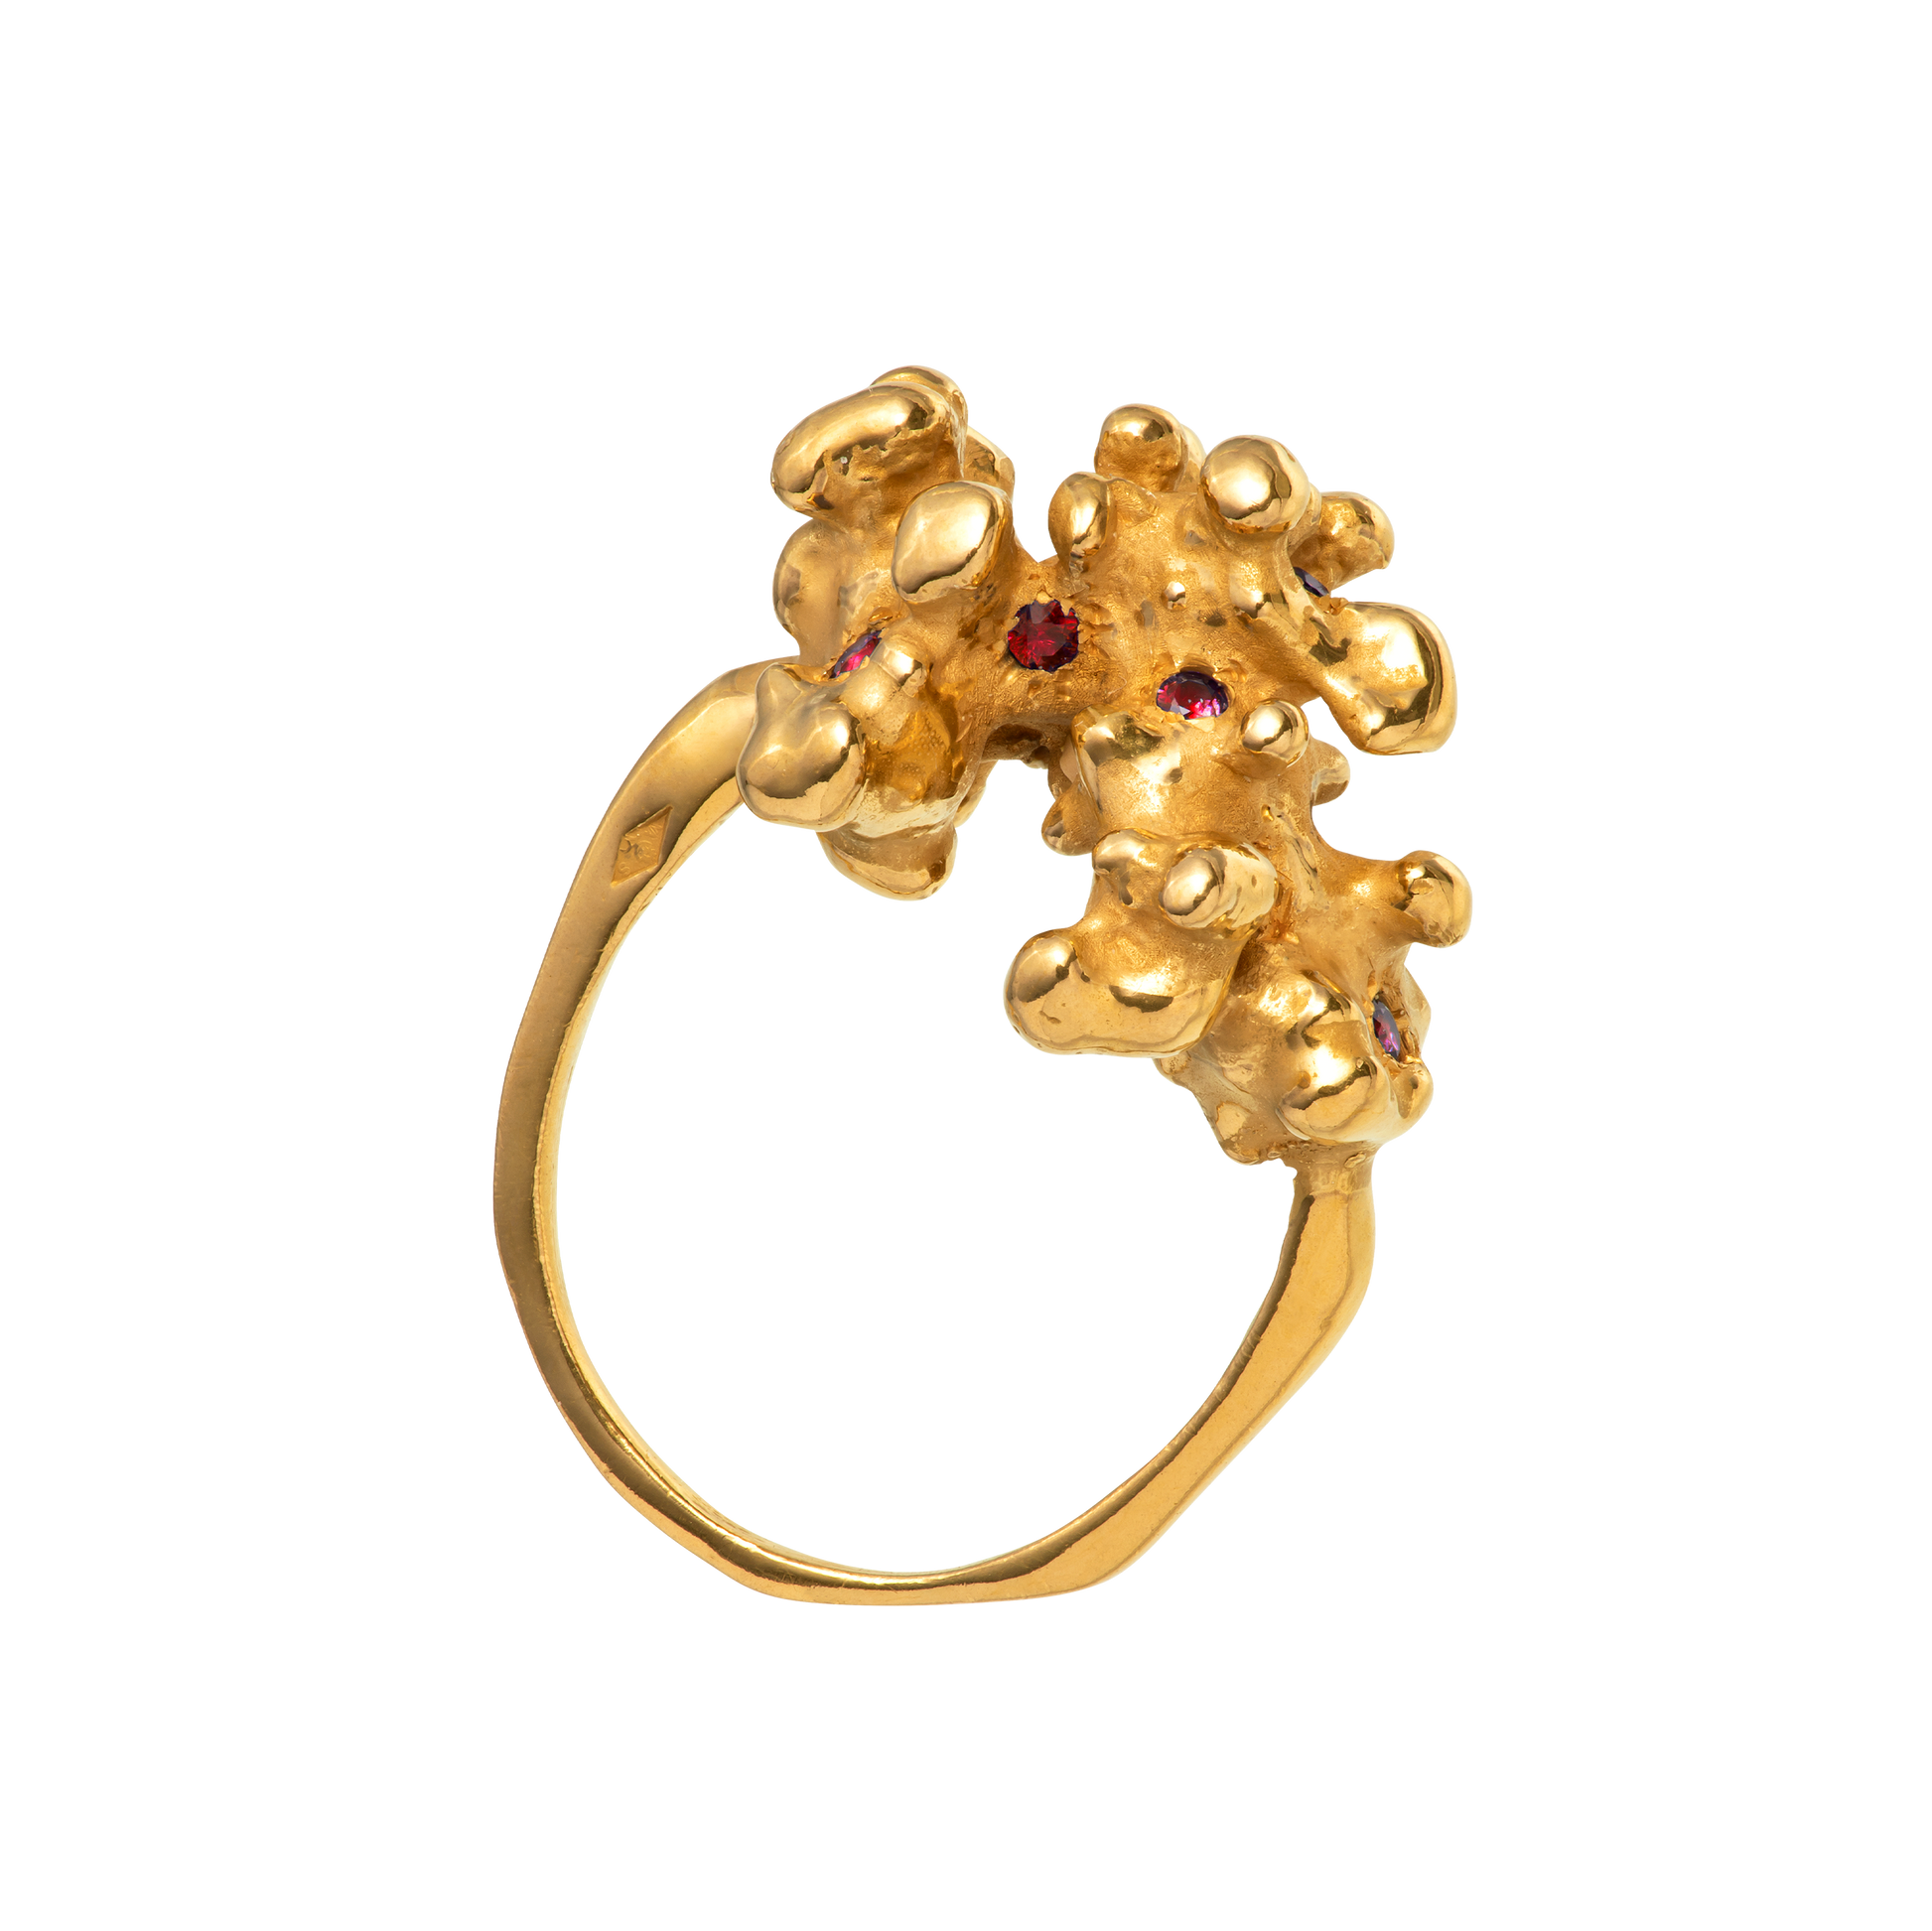 A gold ring made from a cast of a fragment of coral as set with 10 rubies. Handmade by Violette Stehli.